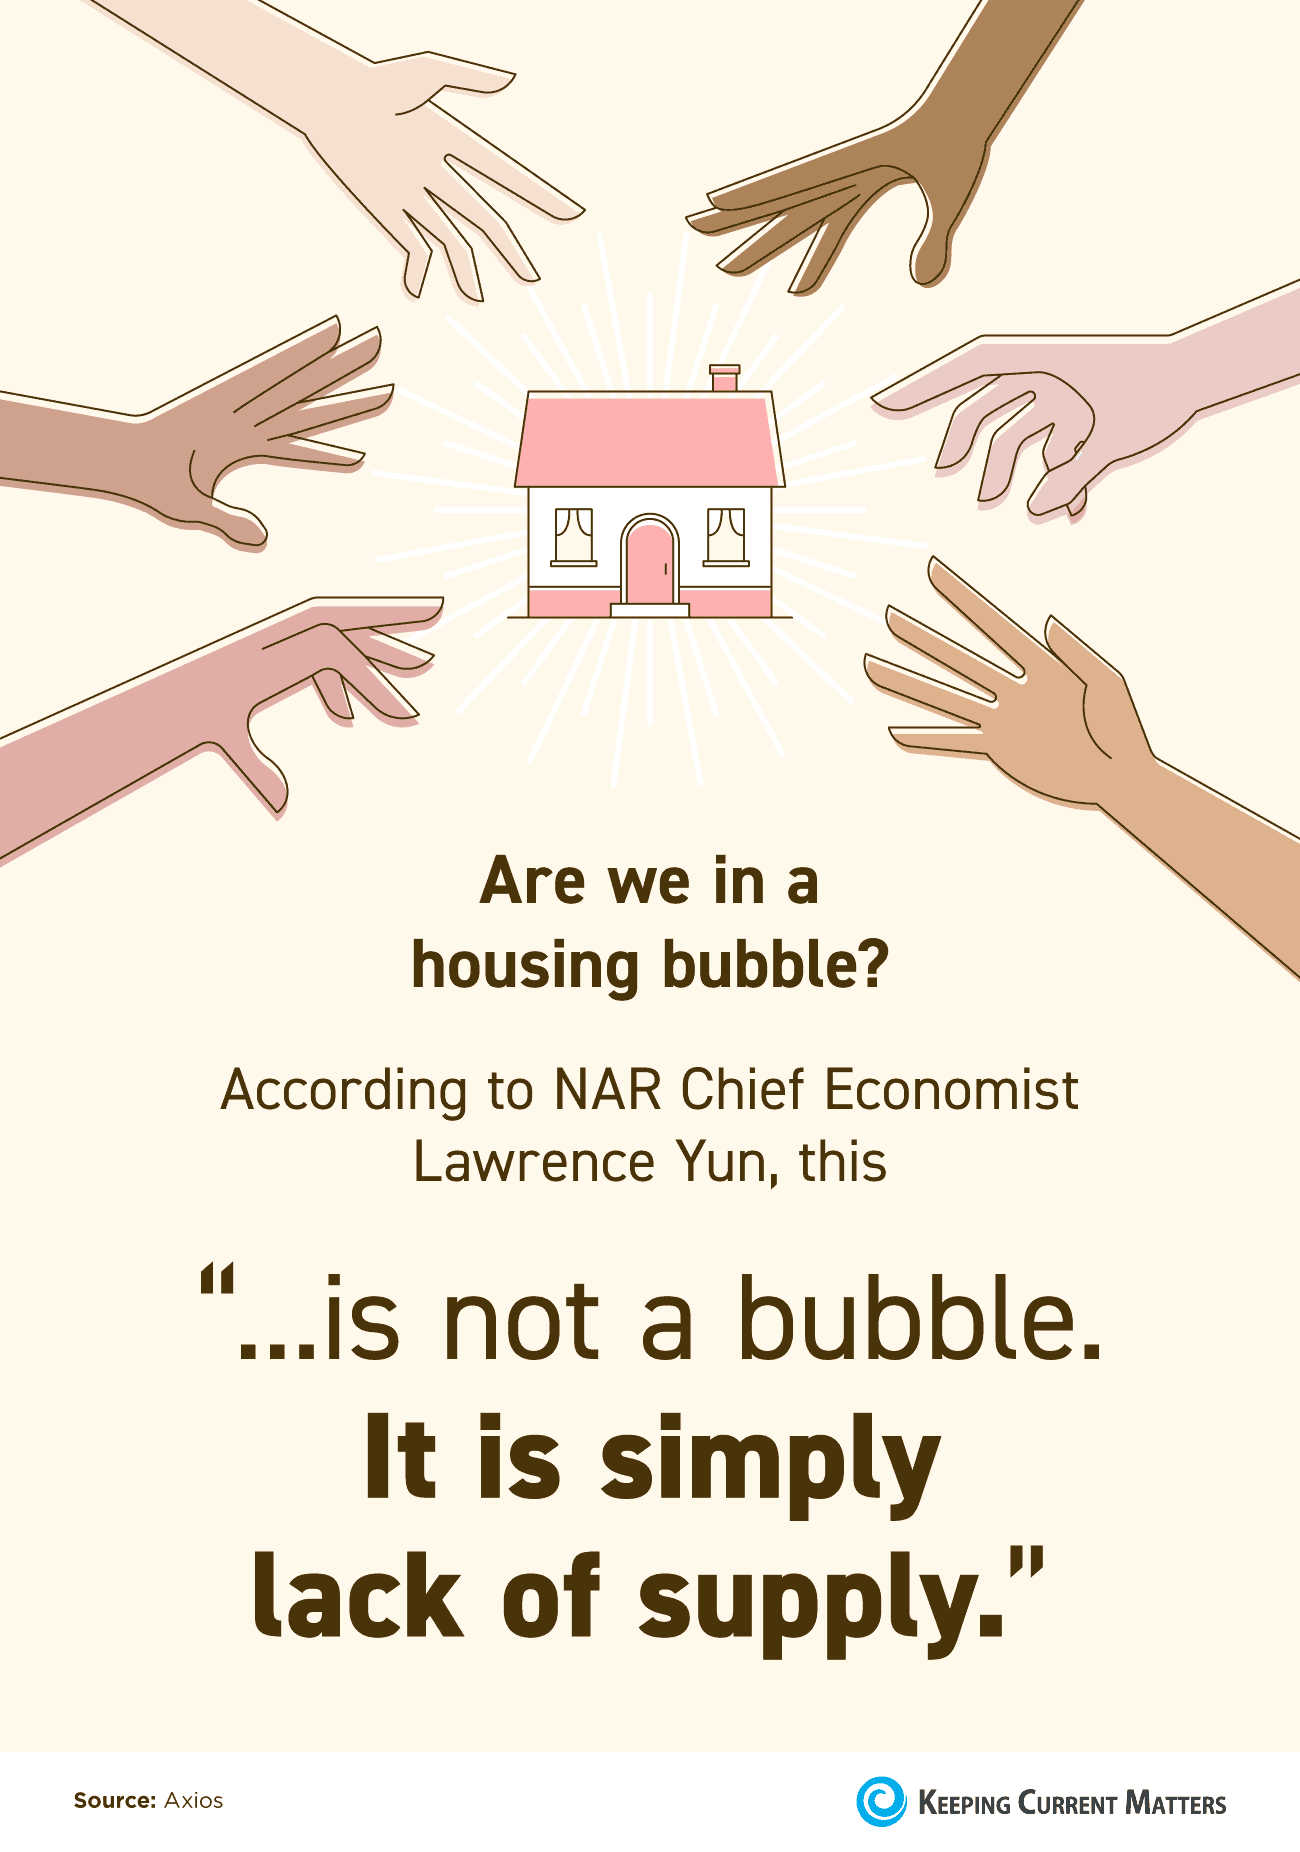 This Isn’t a Bubble. It’s Simply Lack of Supply. [INFOGRAPHIC] | Keeping Current Matters